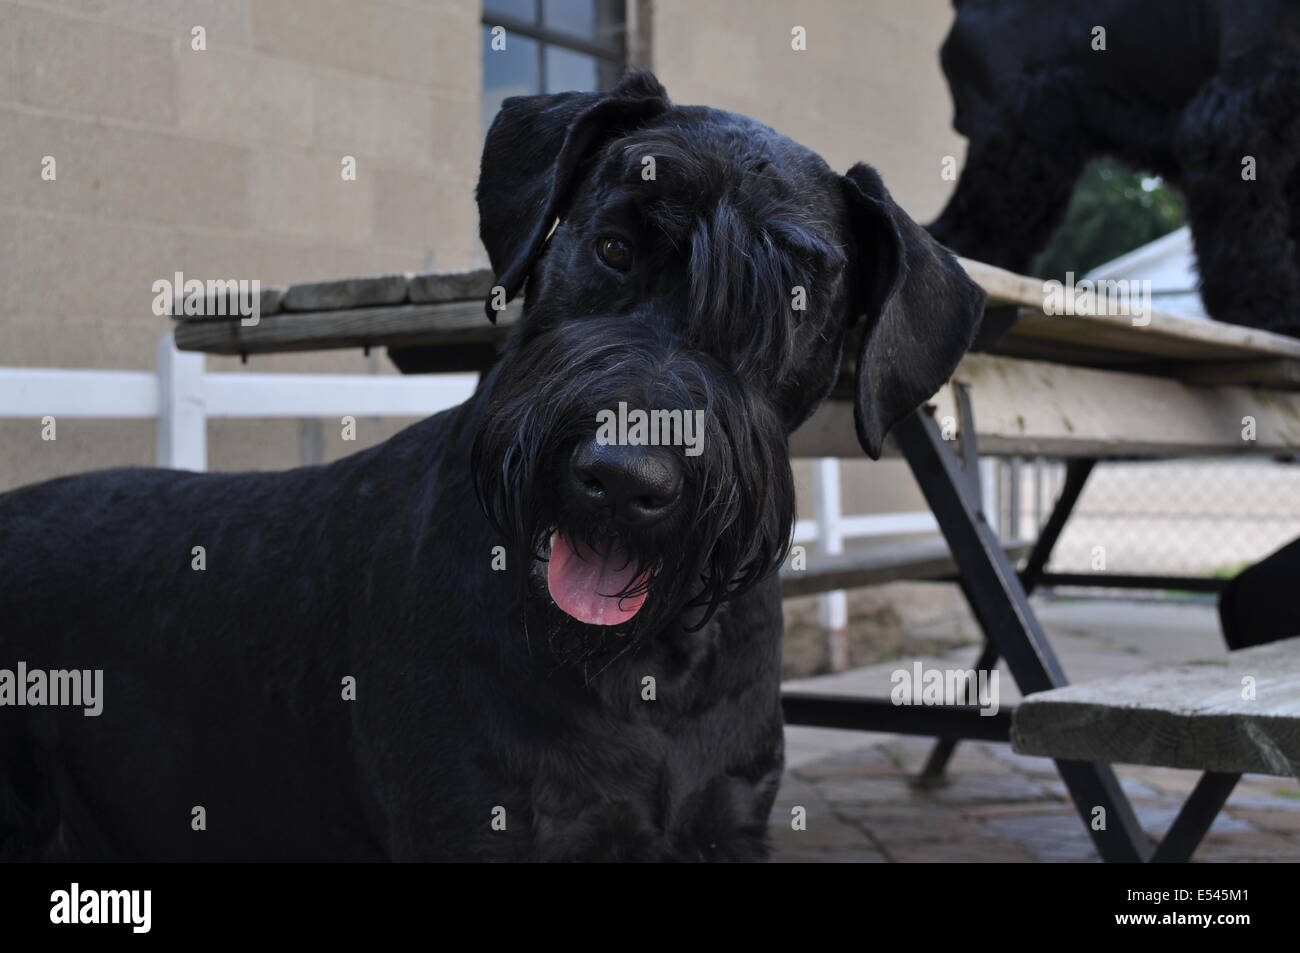 Super Cute Giant Schnauzer Looking at Camera Stock Photo